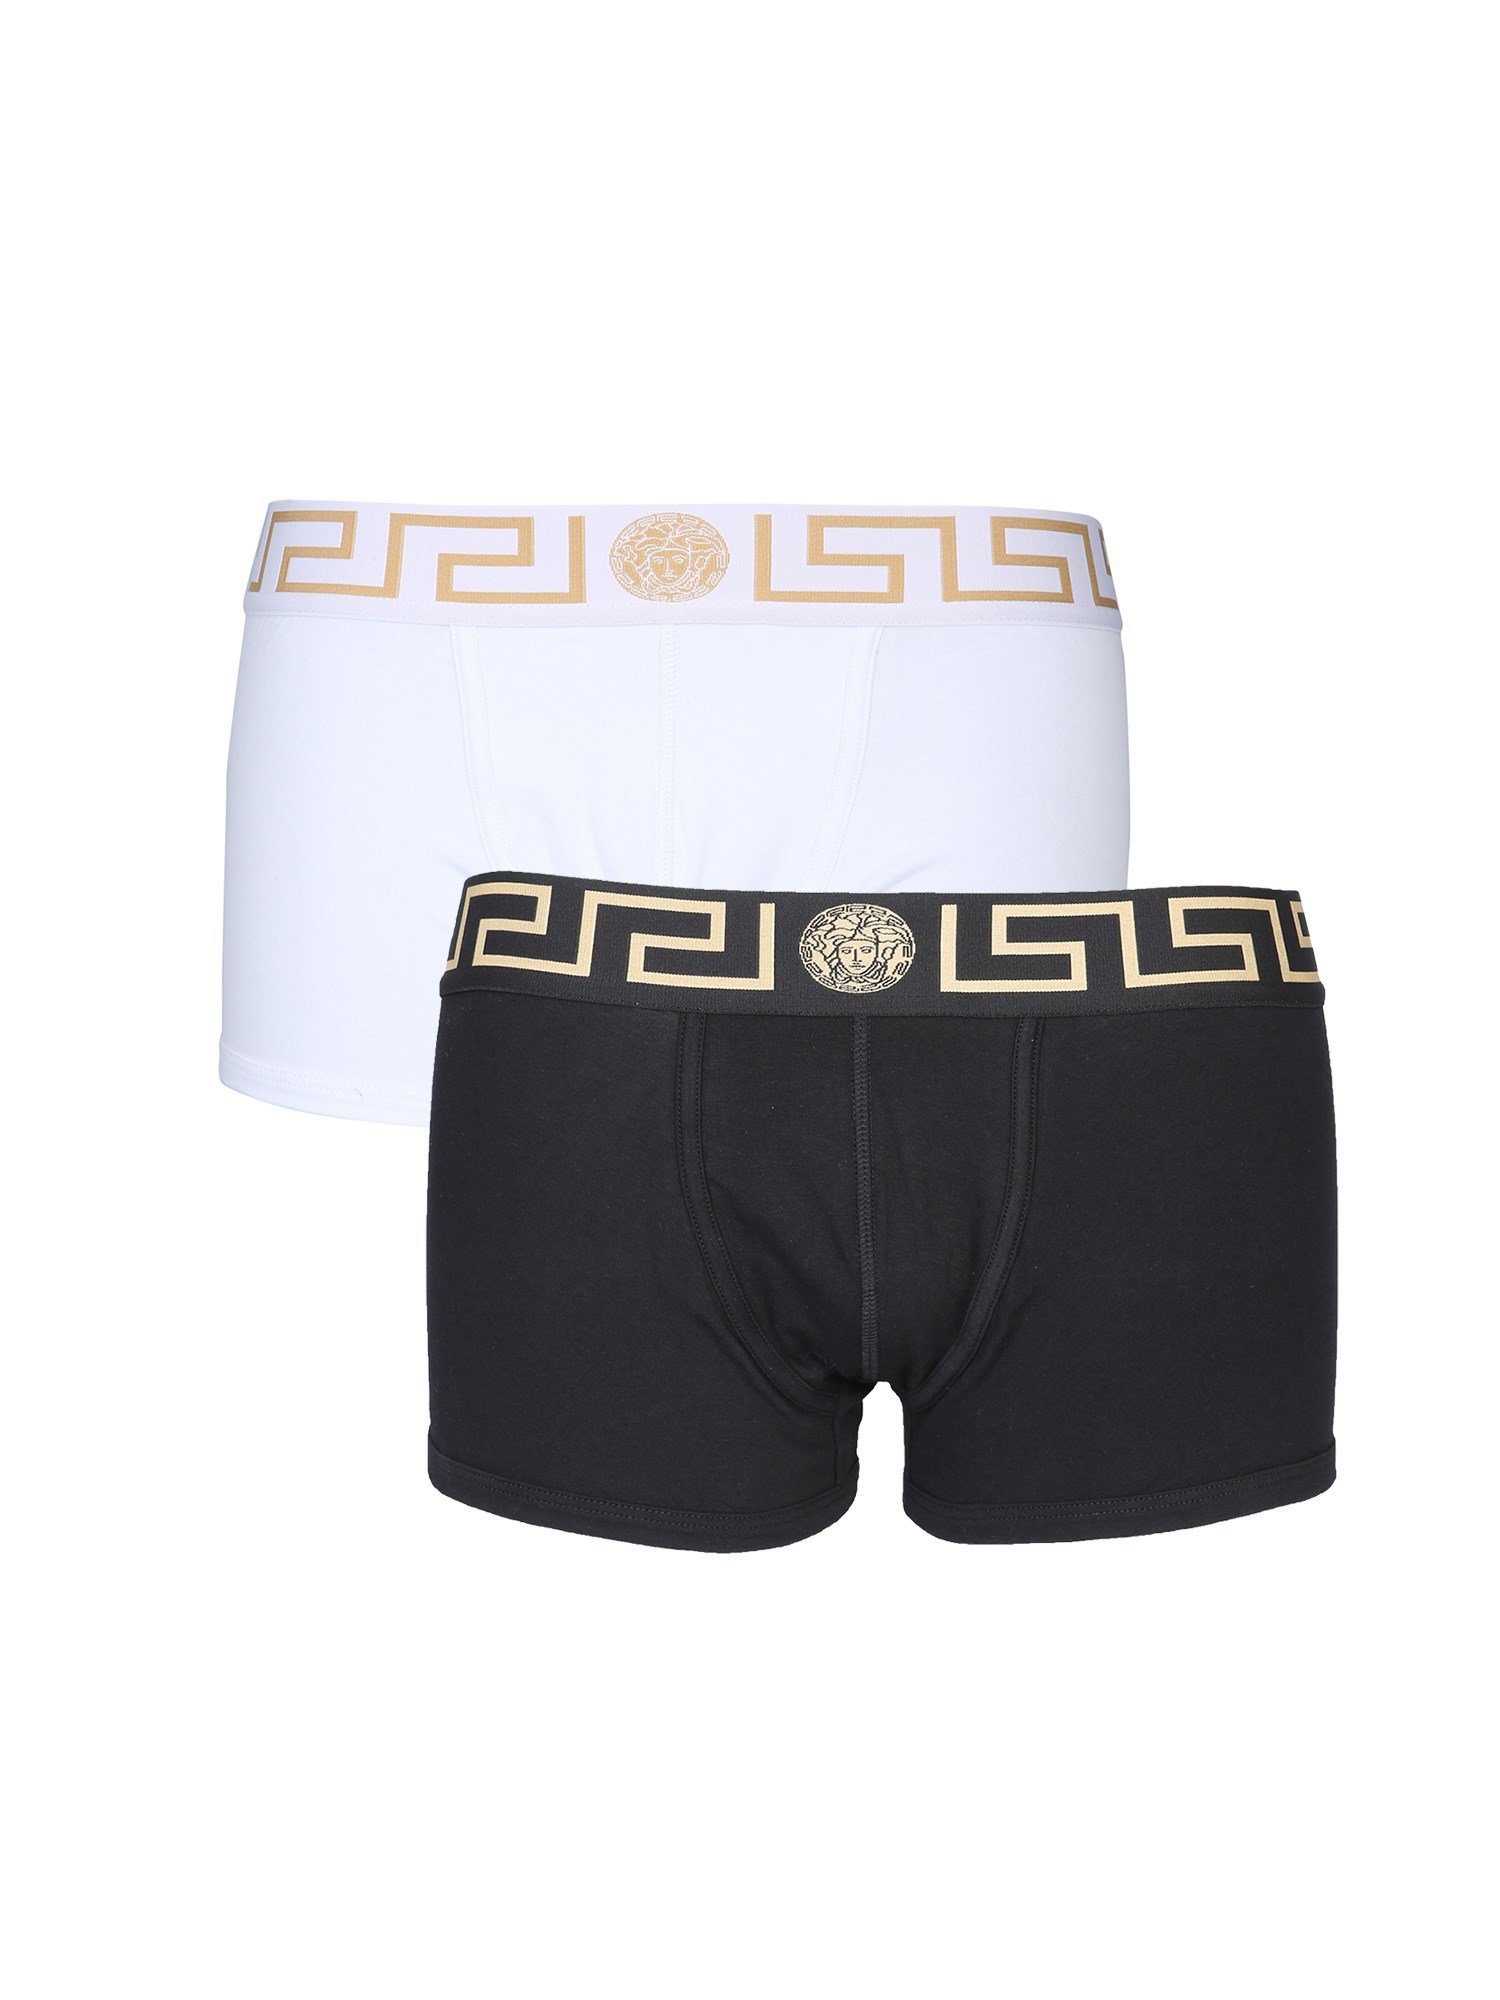 versace pack of two boxer shorts with greek